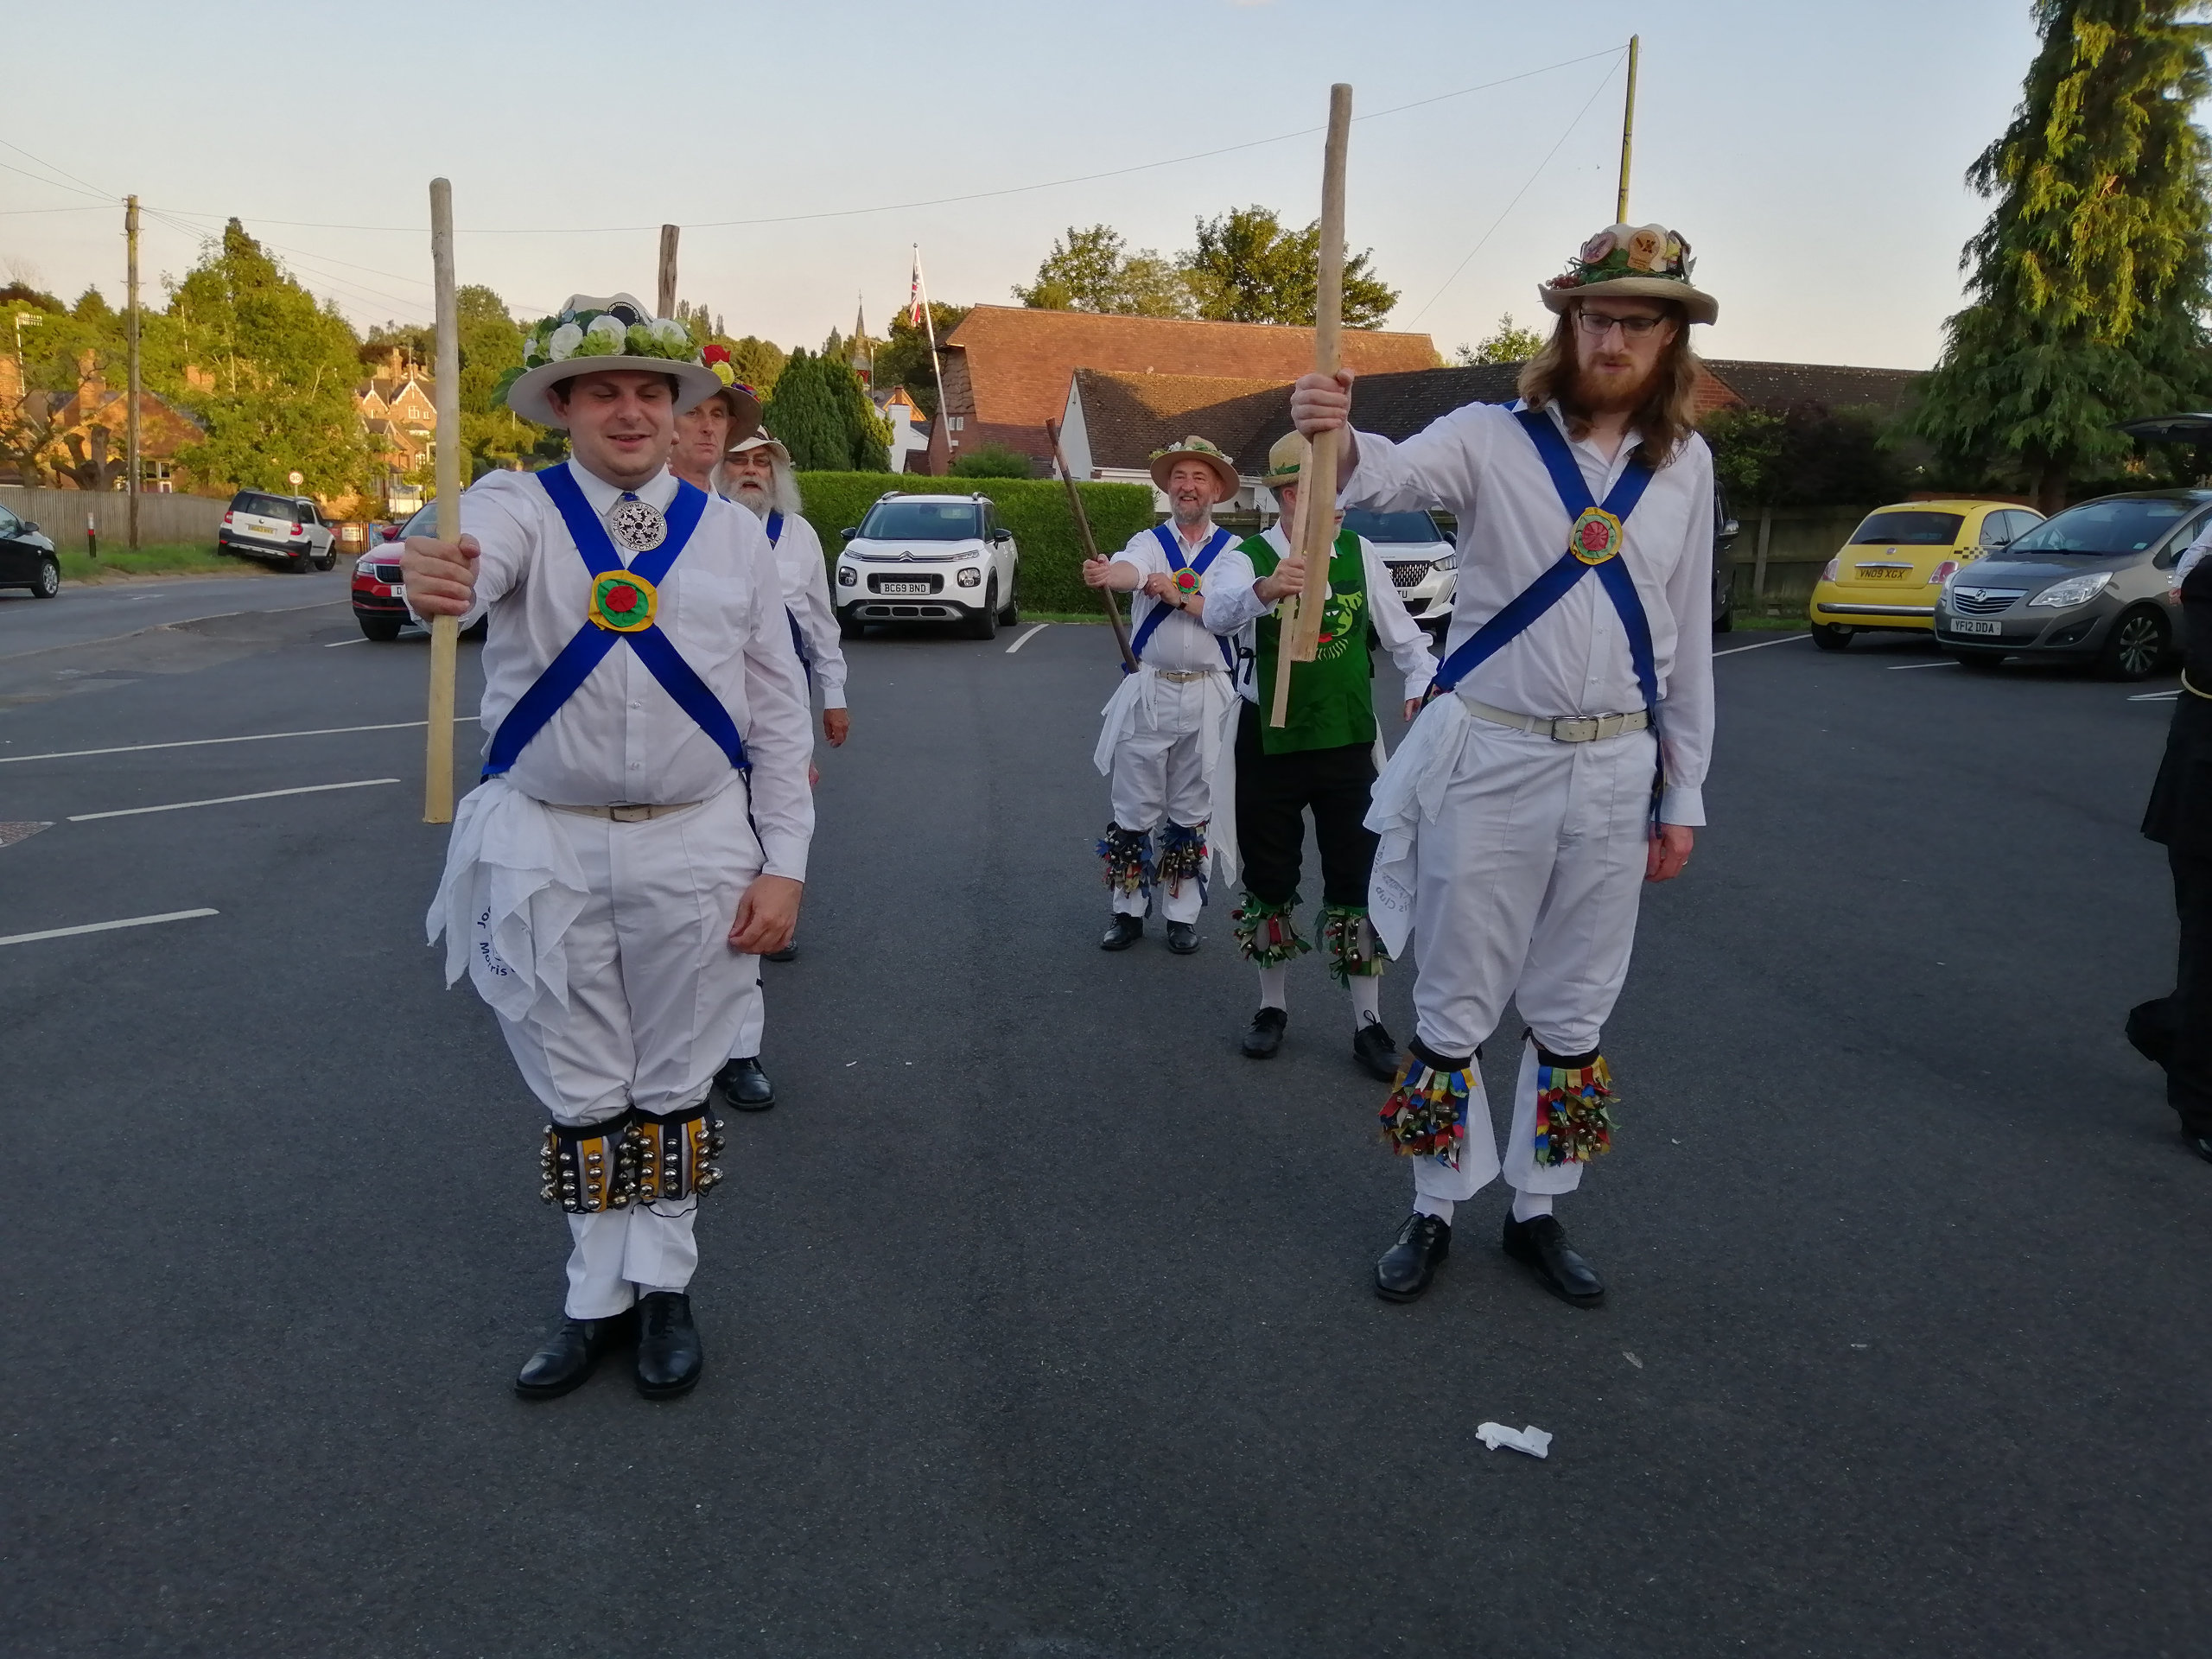 Dance Out with Shakespeare Morris - July 2021